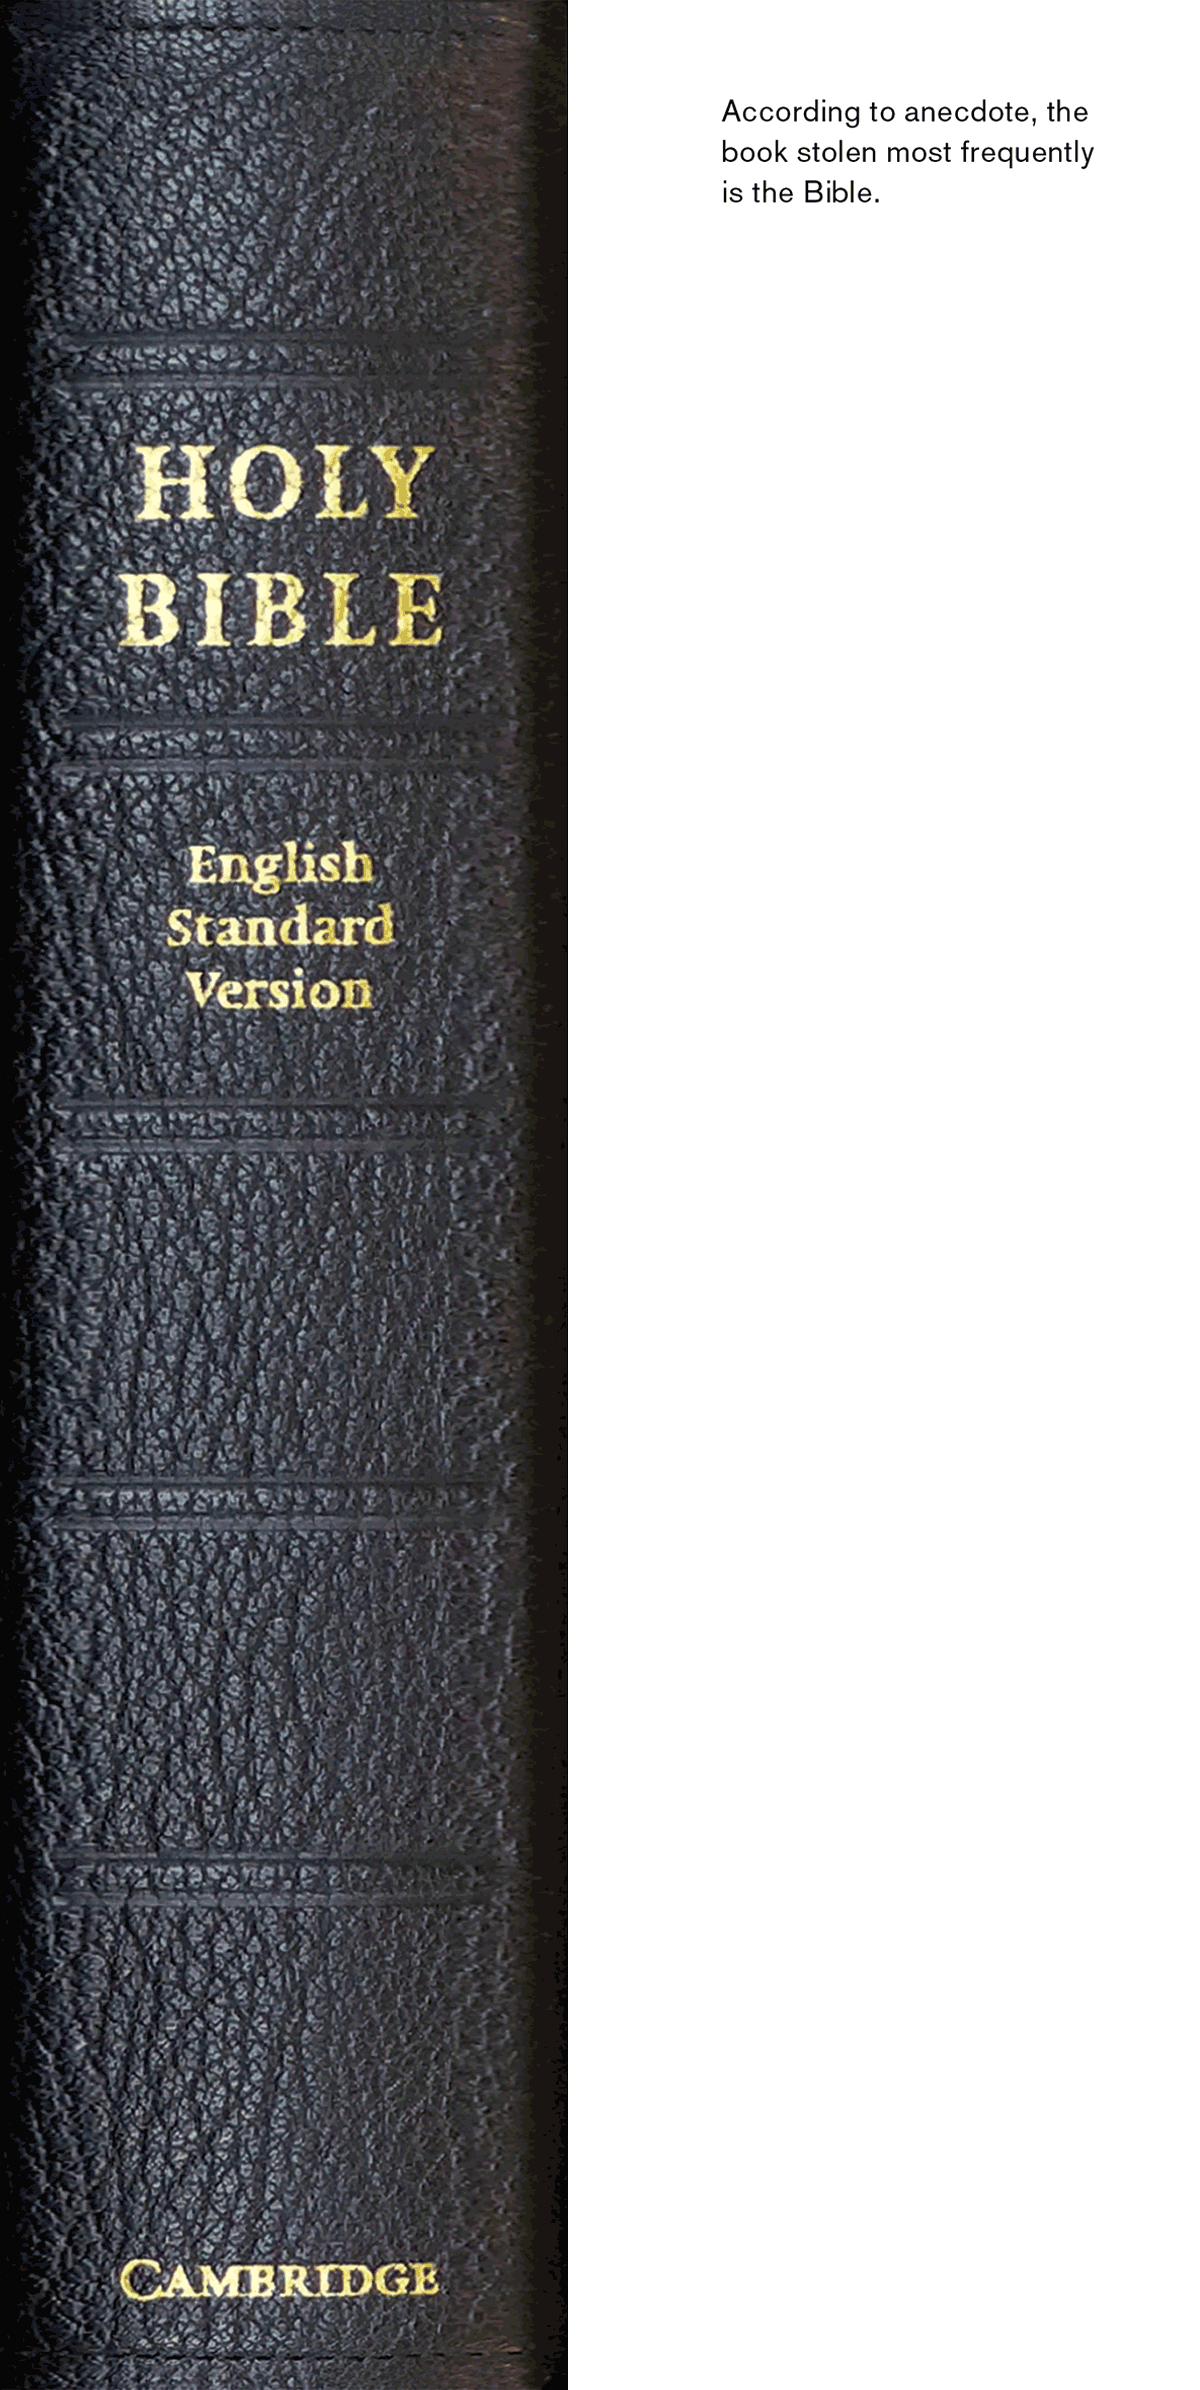 A bookmark depicting the spine of the “Holy Bible, English Standard Version.” The back of the bookmark reads “According to the anecdote, the book stolen most frequently is the Bible.”